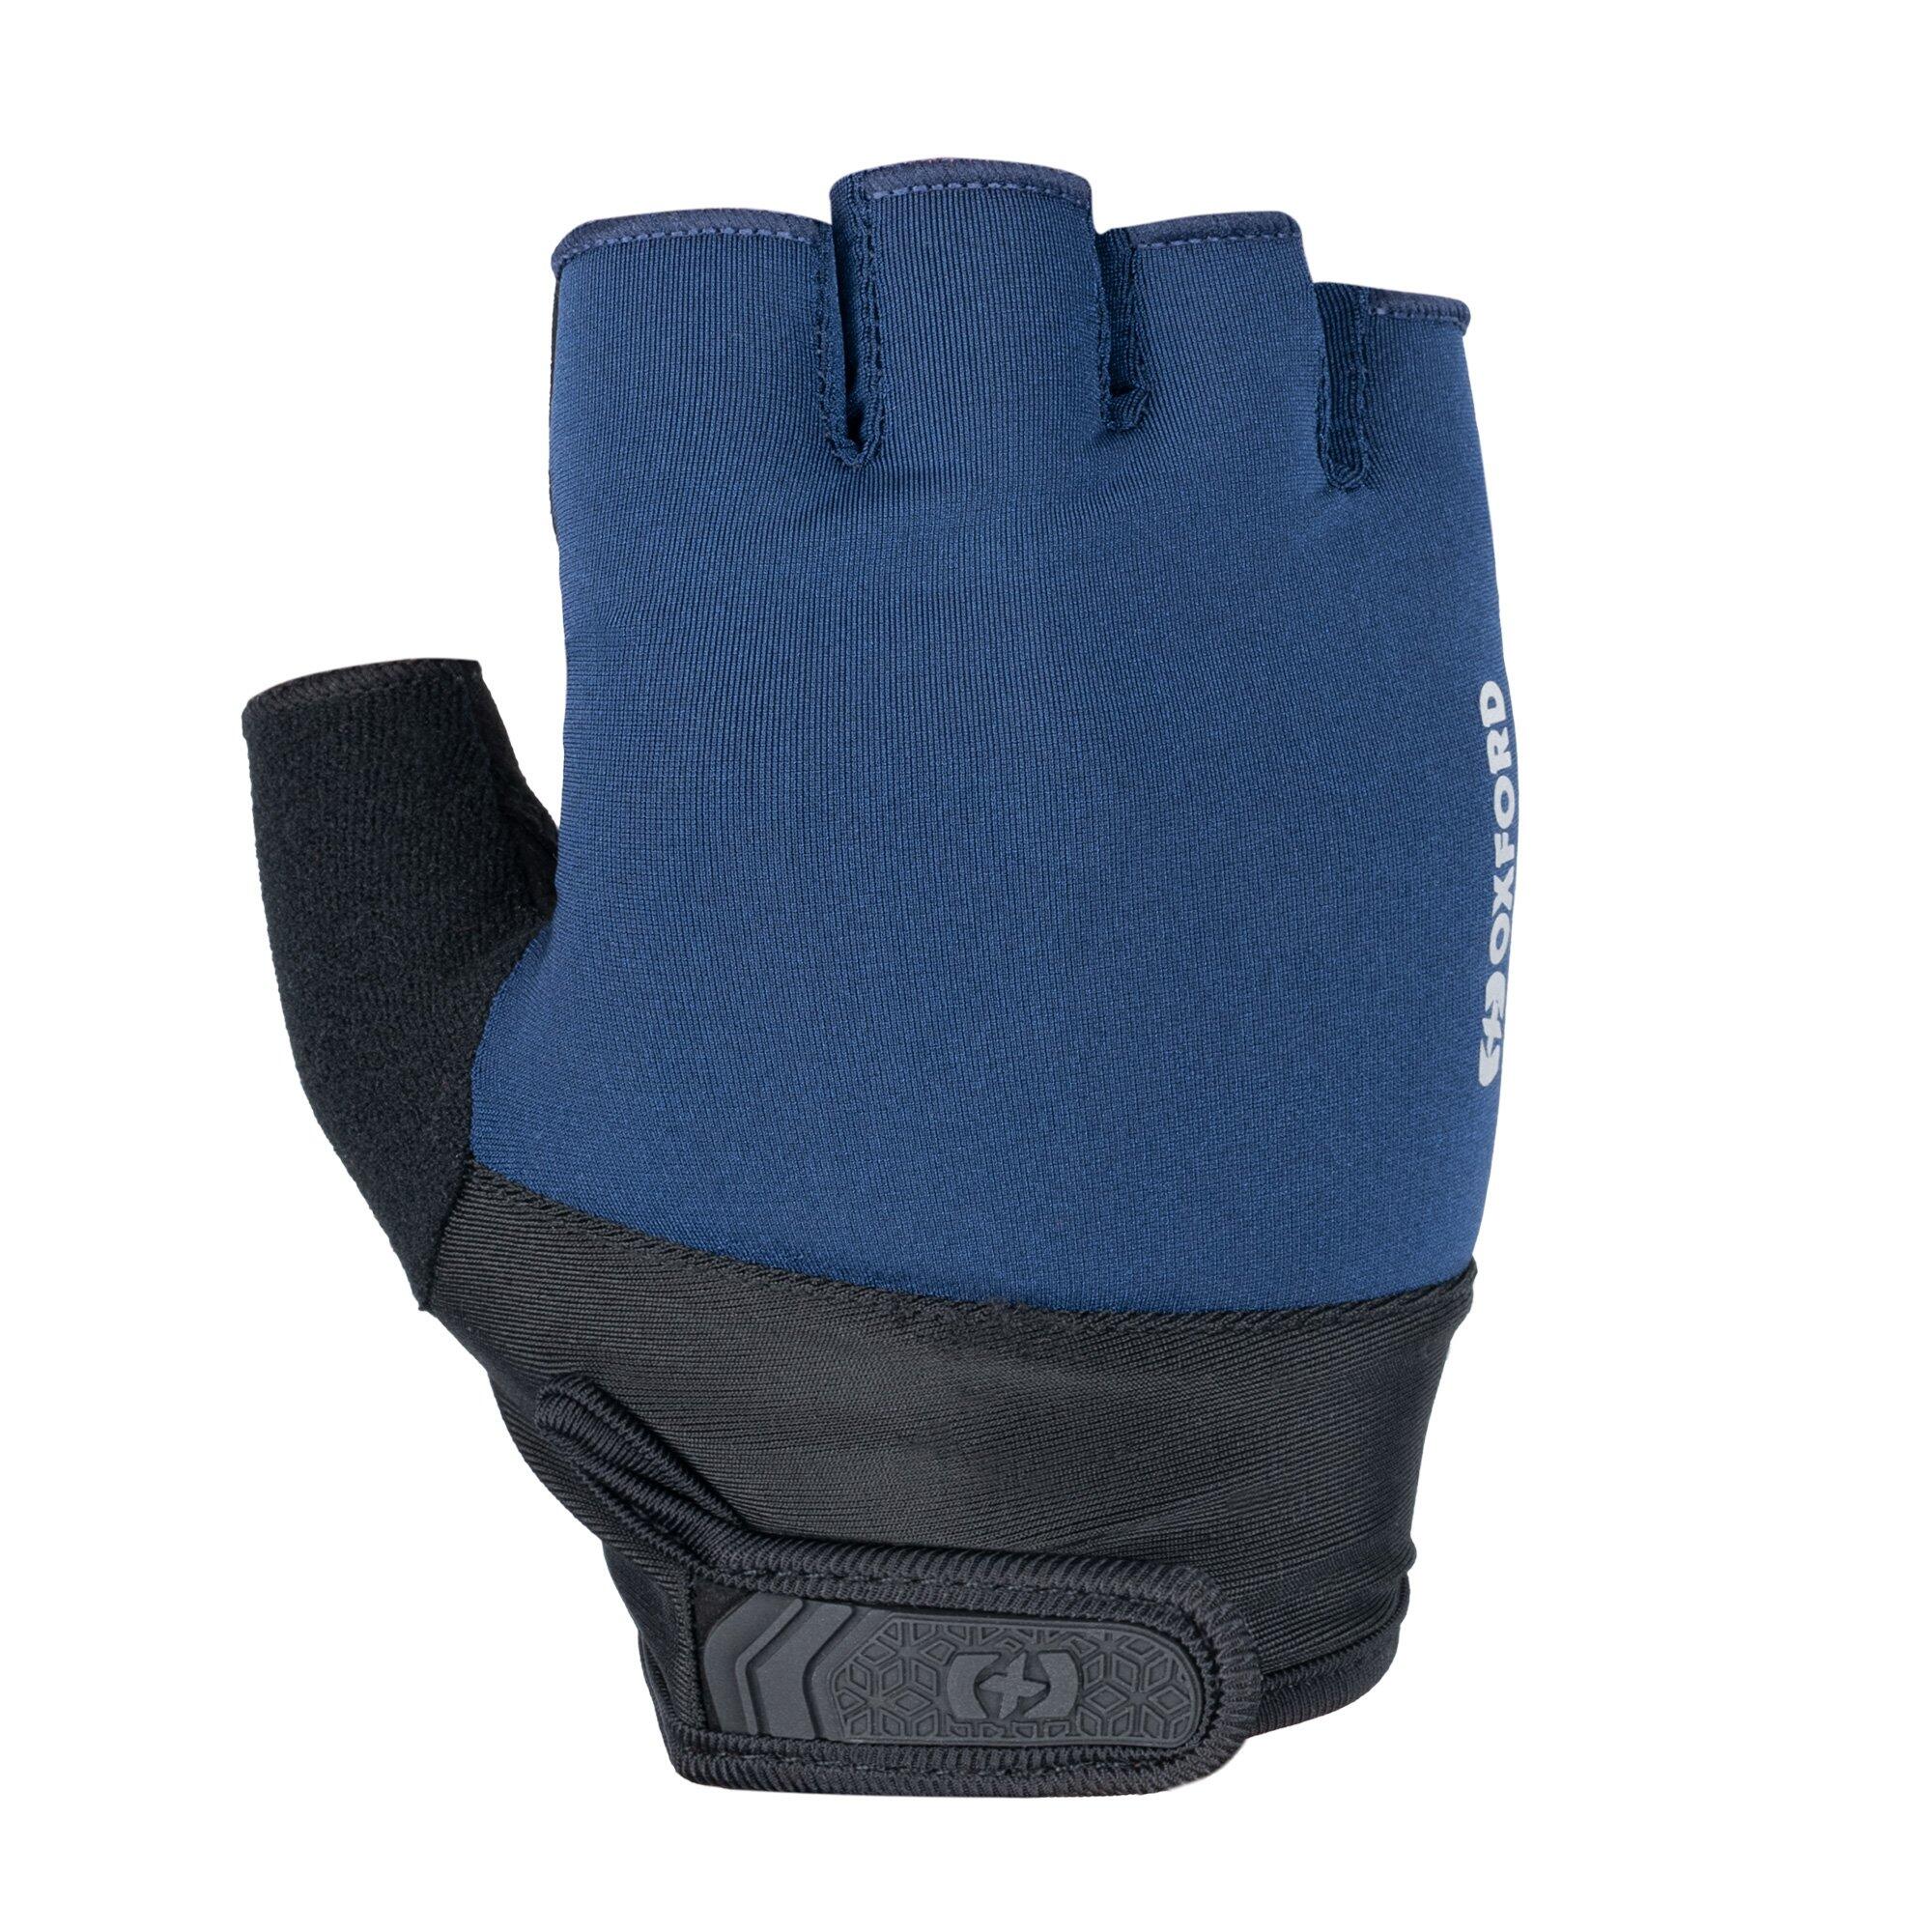 OXFORD Oxford Cadence 2.0 Mitts Blue M